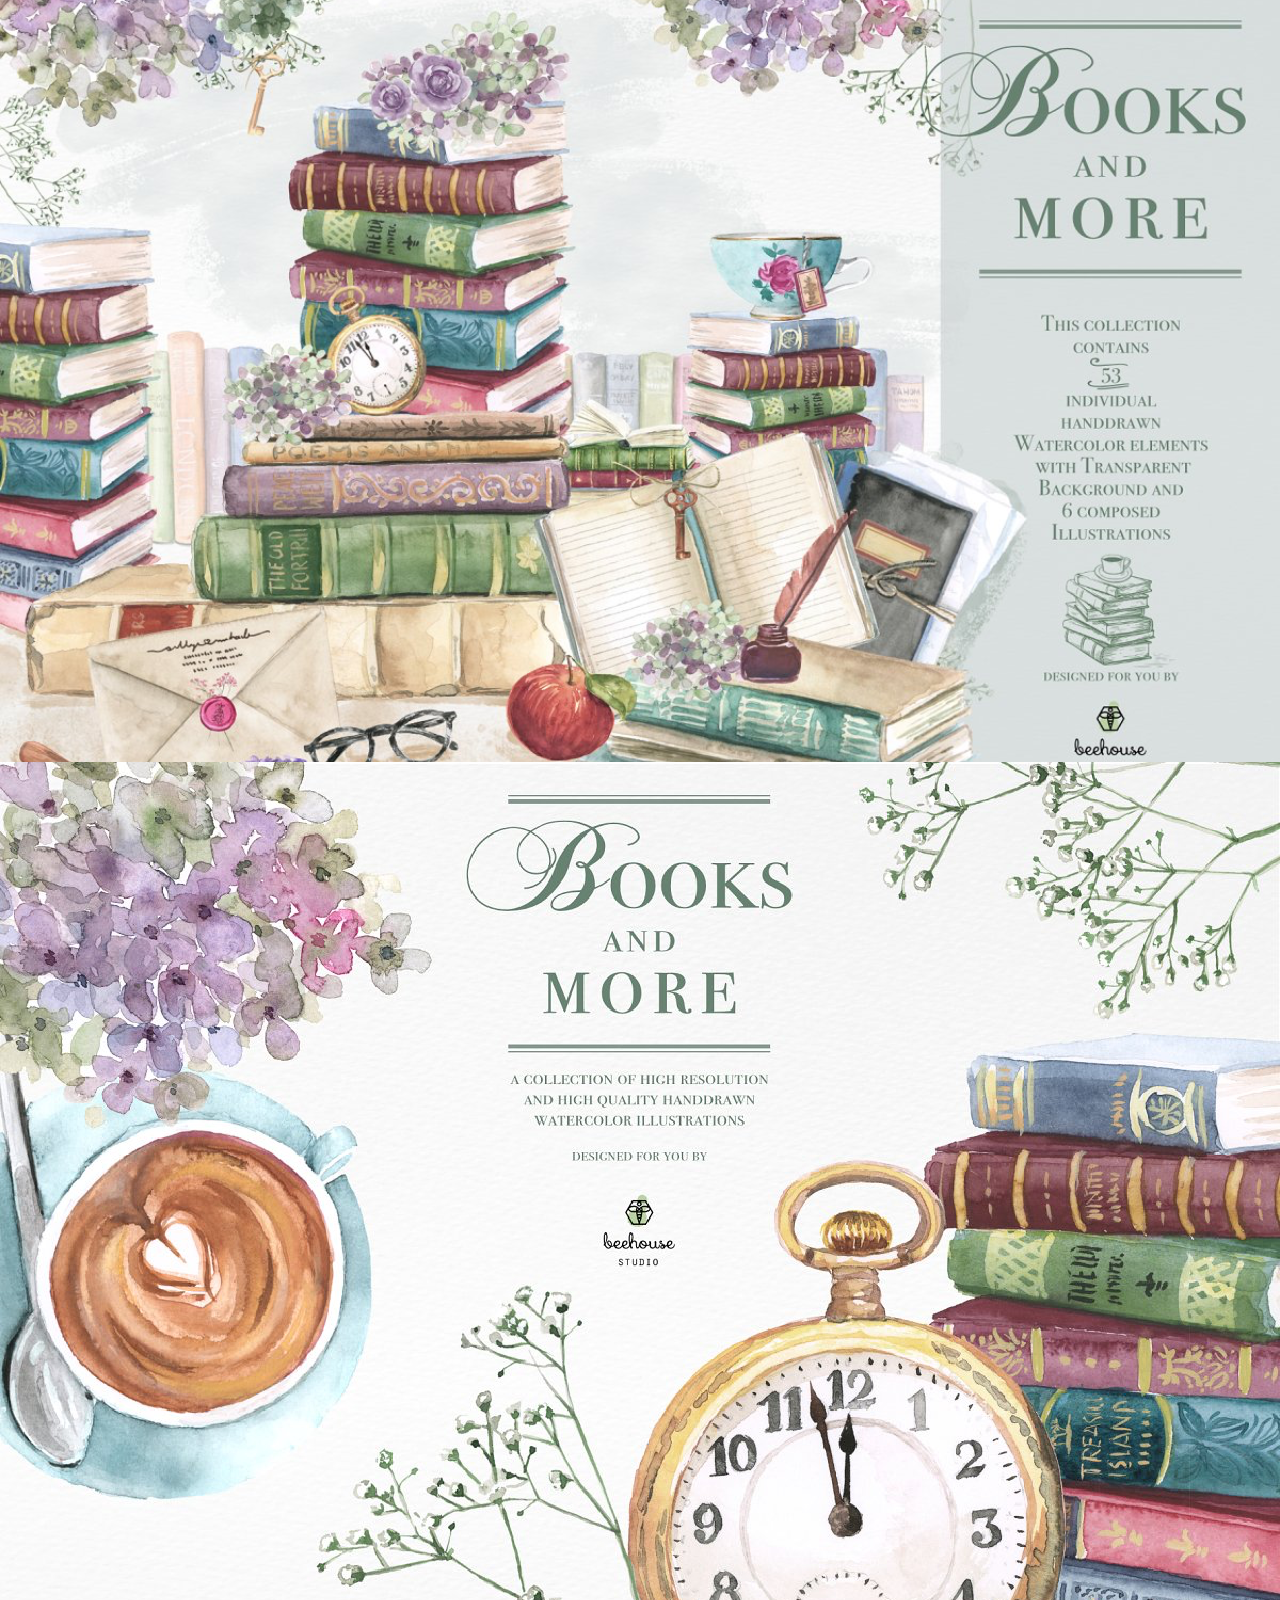 Booksmore watercolor illustrations pinterest image preview.